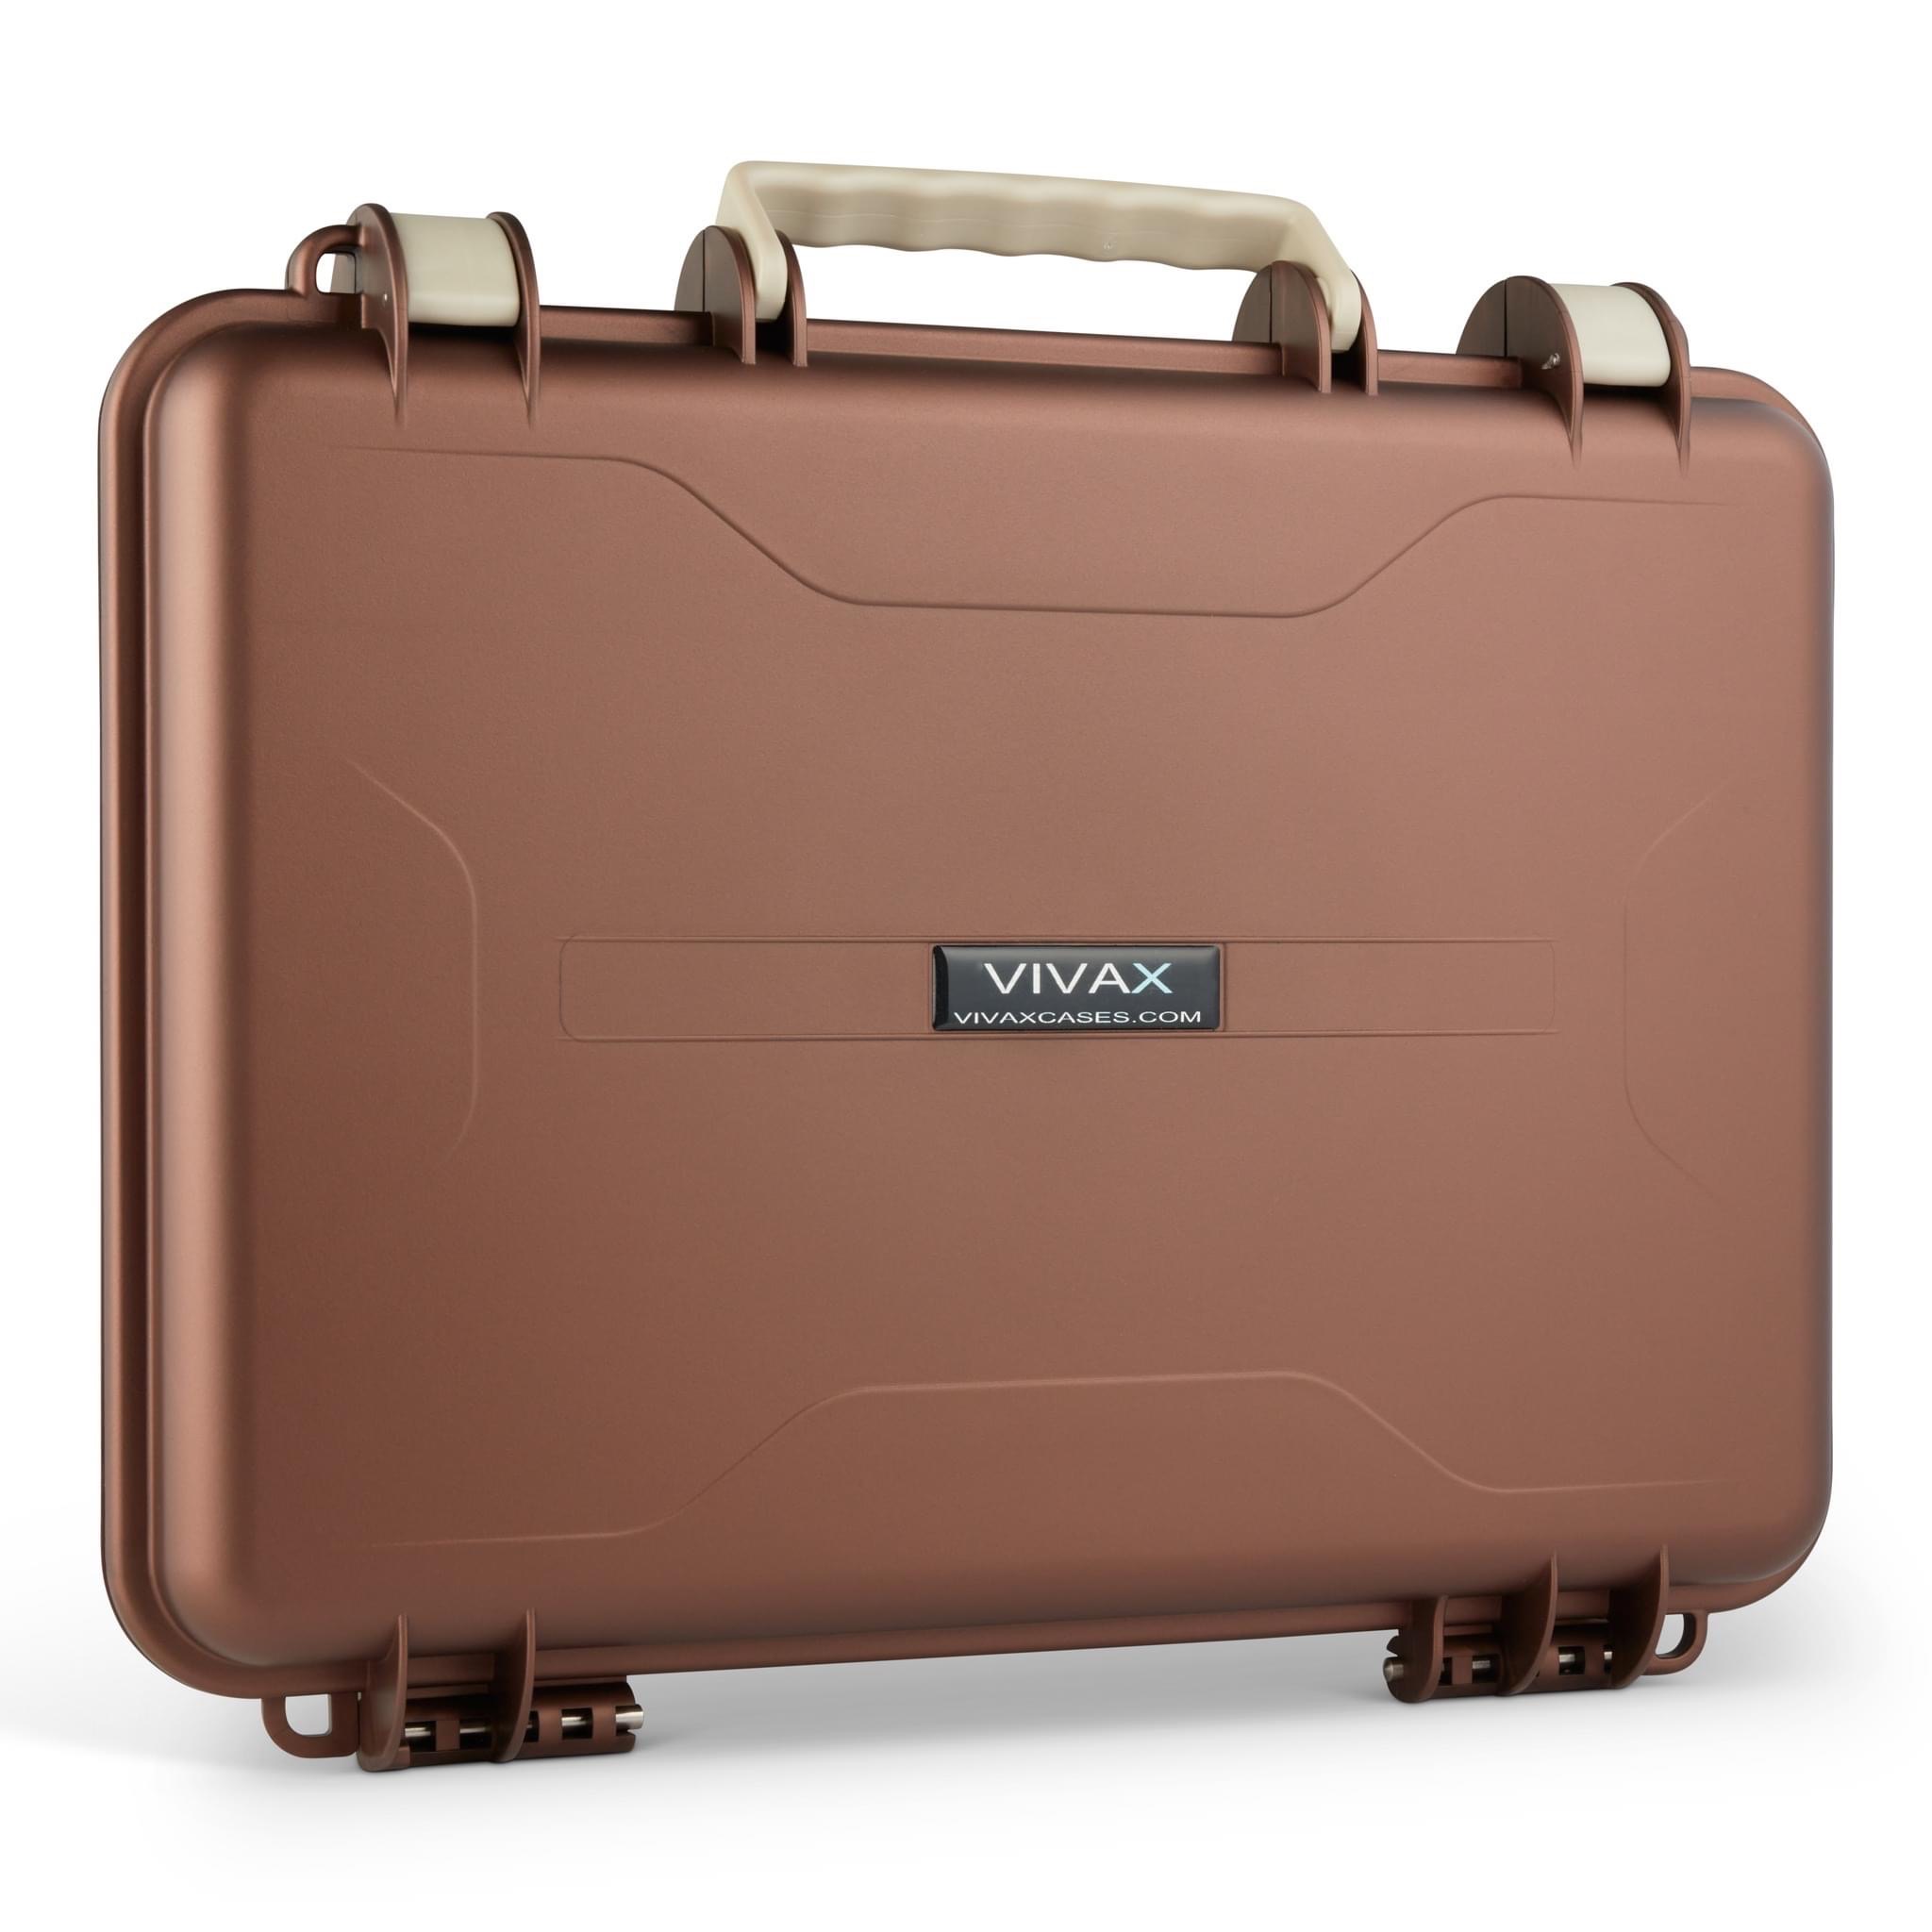 Vivax Laptop Bronze for laptops upto 15.6” and Mac Book 16” Pro series